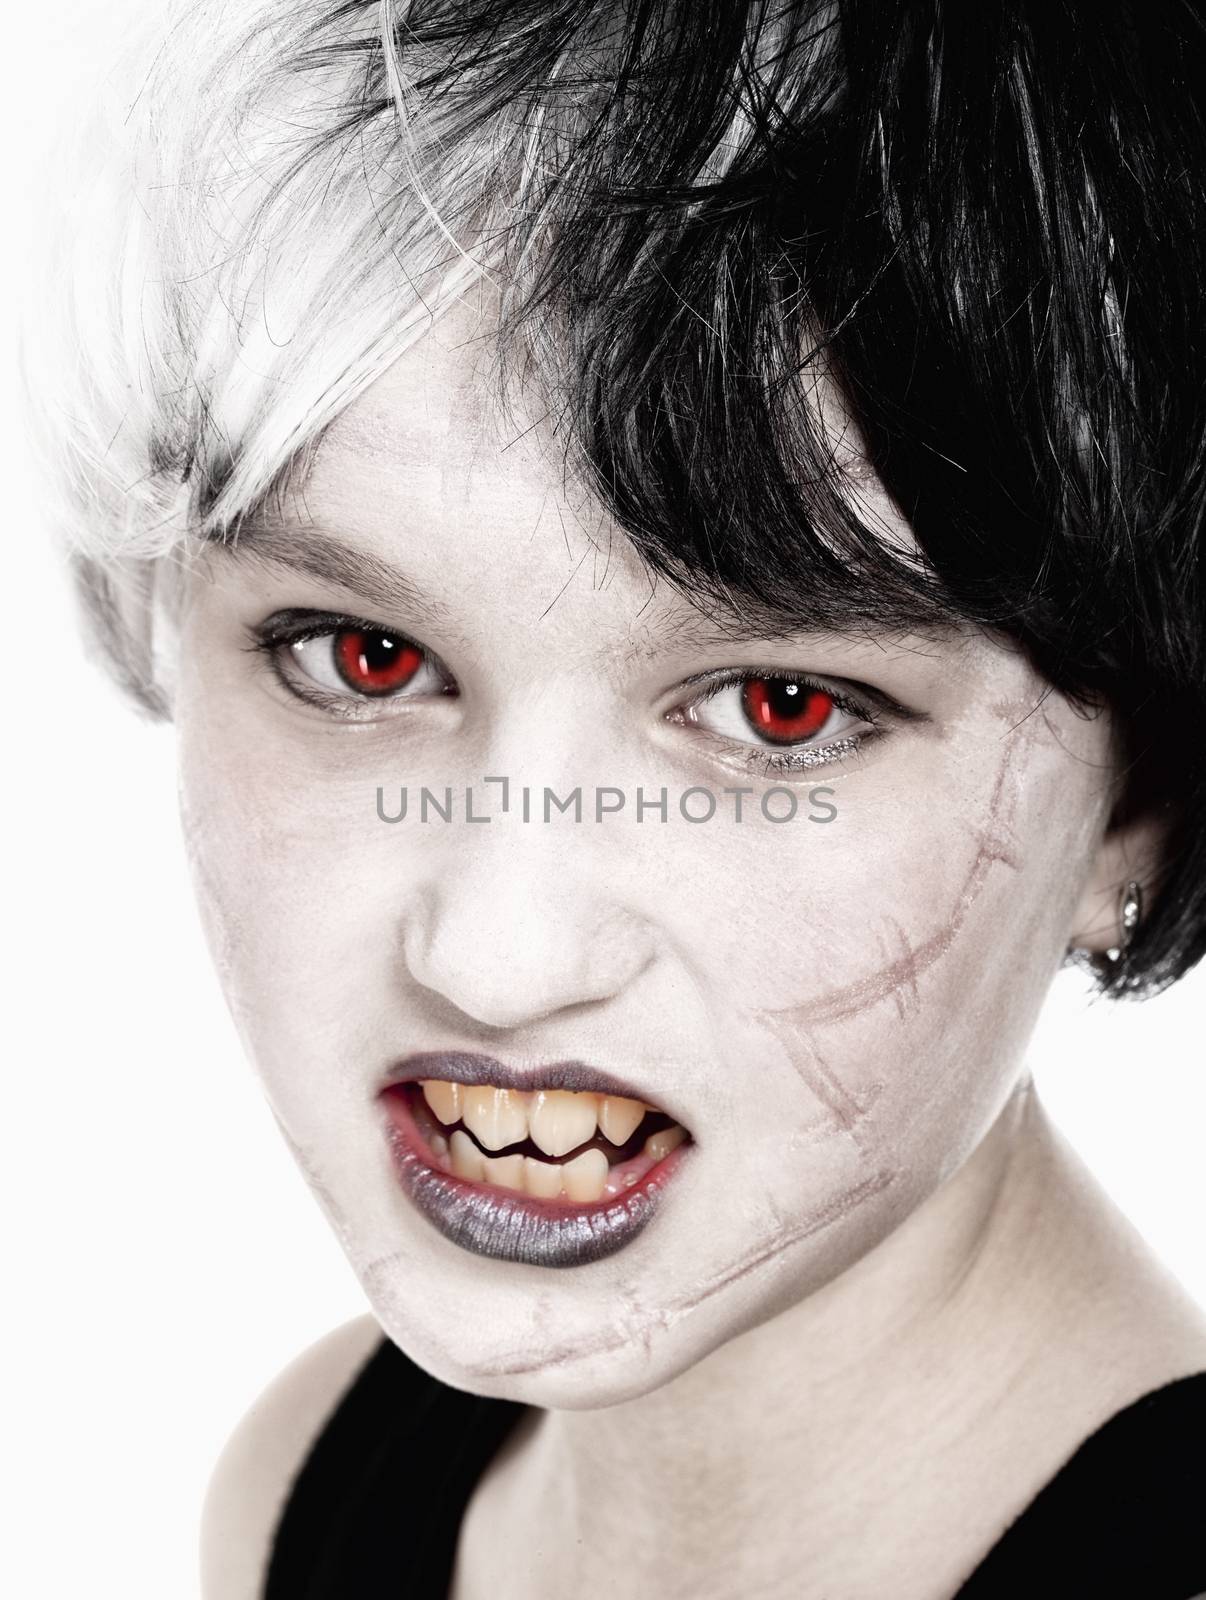 Portrait of a Young Girl in Wig Posing as Vampire